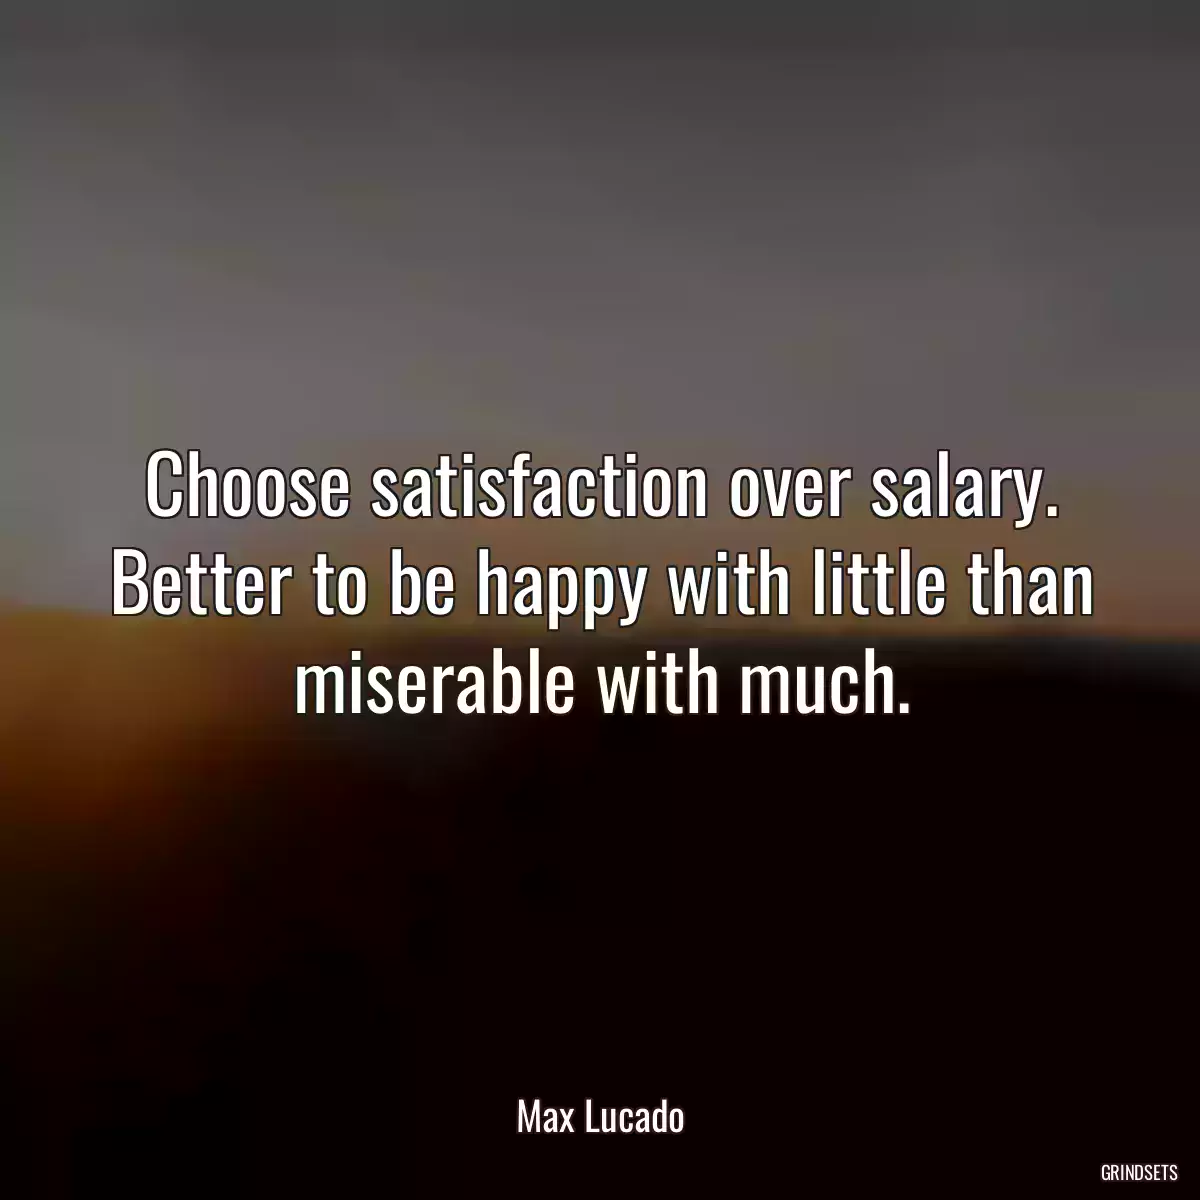 Choose satisfaction over salary. Better to be happy with little than miserable with much.